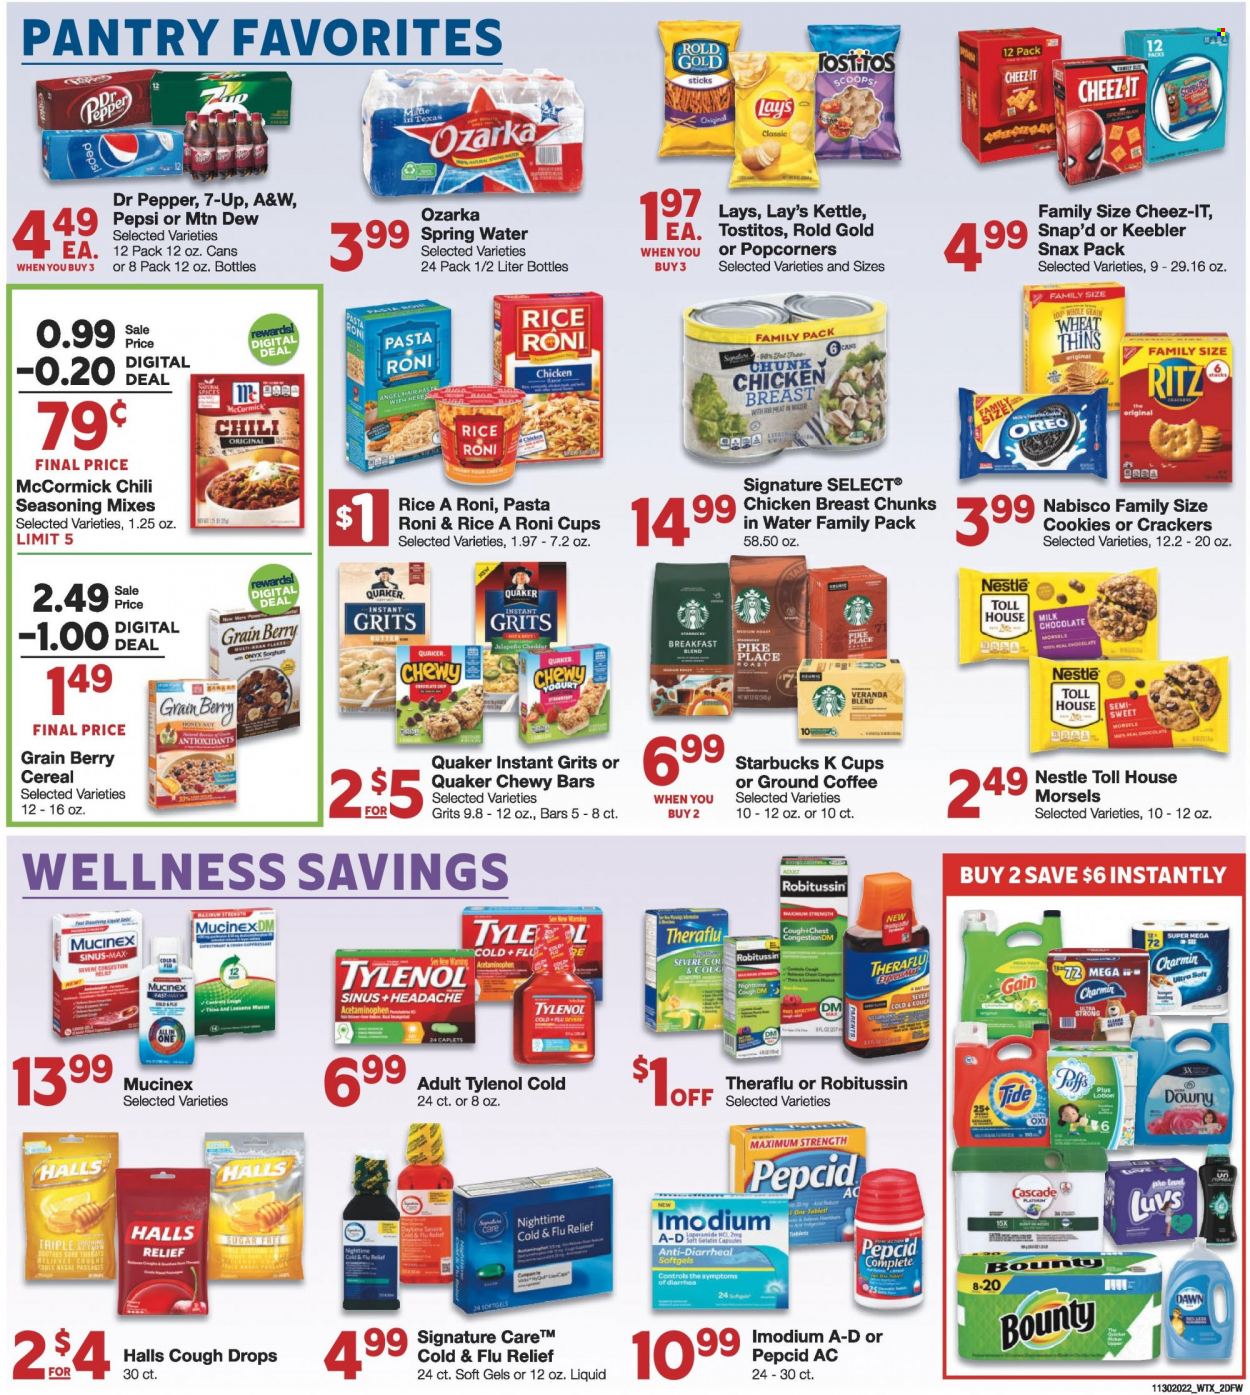 thumbnail - Market Street Flyer - 11/30/2022 - 12/06/2022 - Sales products - jalapeño, pasta, Quaker, cheese, Oreo, yoghurt, milk, butter, cookies, Nestlé, Halls, Bounty, crackers, Keebler, RITZ, Lay’s, Thins, popcorn, Cheez-It, Tostitos, grits, cereals, spice, Mountain Dew, Pepsi, Dr. Pepper, 7UP, A&W, spring water, coffee, Starbucks, ground coffee, coffee capsules, K-Cups, breakfast blend, chicken breasts, Charmin, Gain, Cascade, Tide, body lotion, cup, Cold & Flu, Mucinex, Robitussin, Theraflu, Tylenol, Imodium, Pepcid, gelatin, cough drops. Page 2.